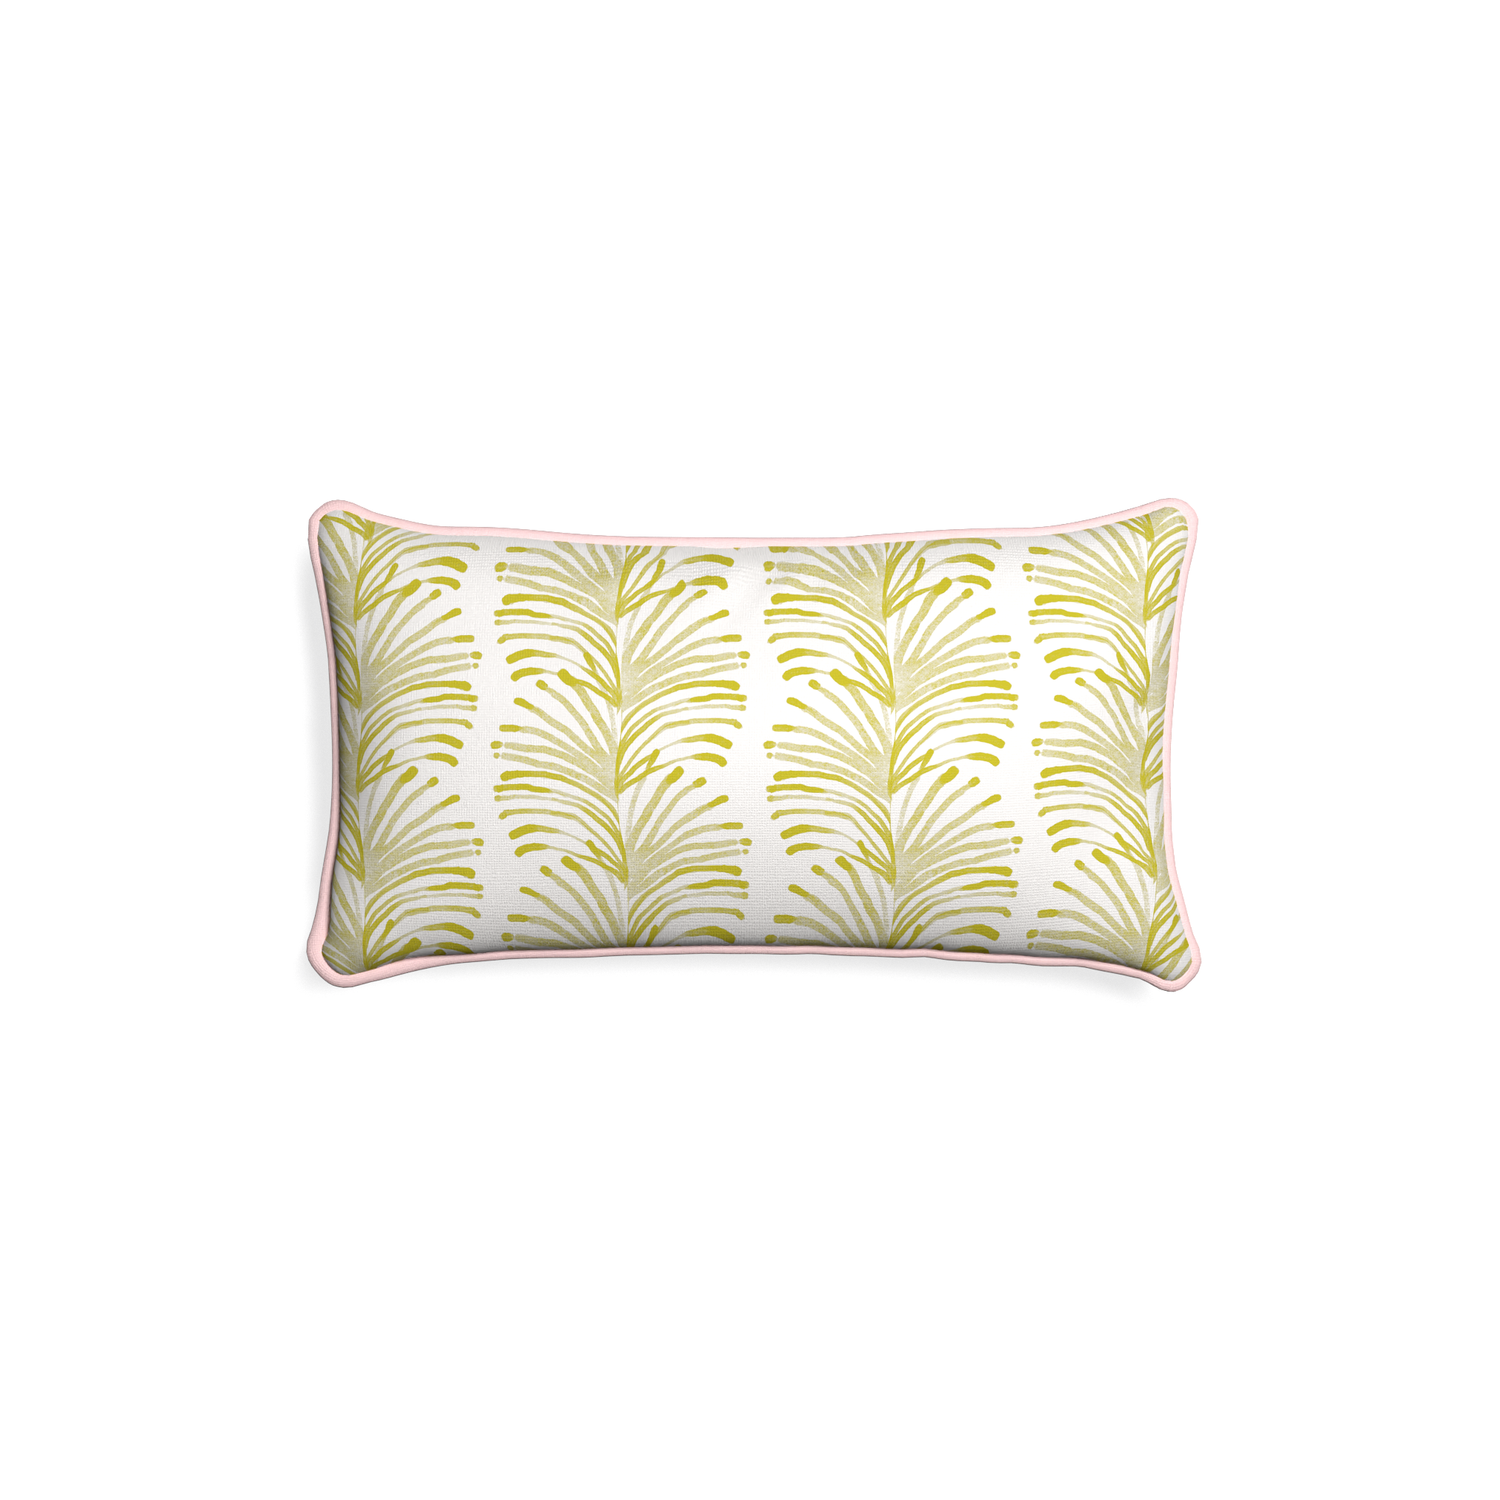 Petite-lumbar emma chartreuse custom yellow stripe chartreusepillow with petal piping on white background